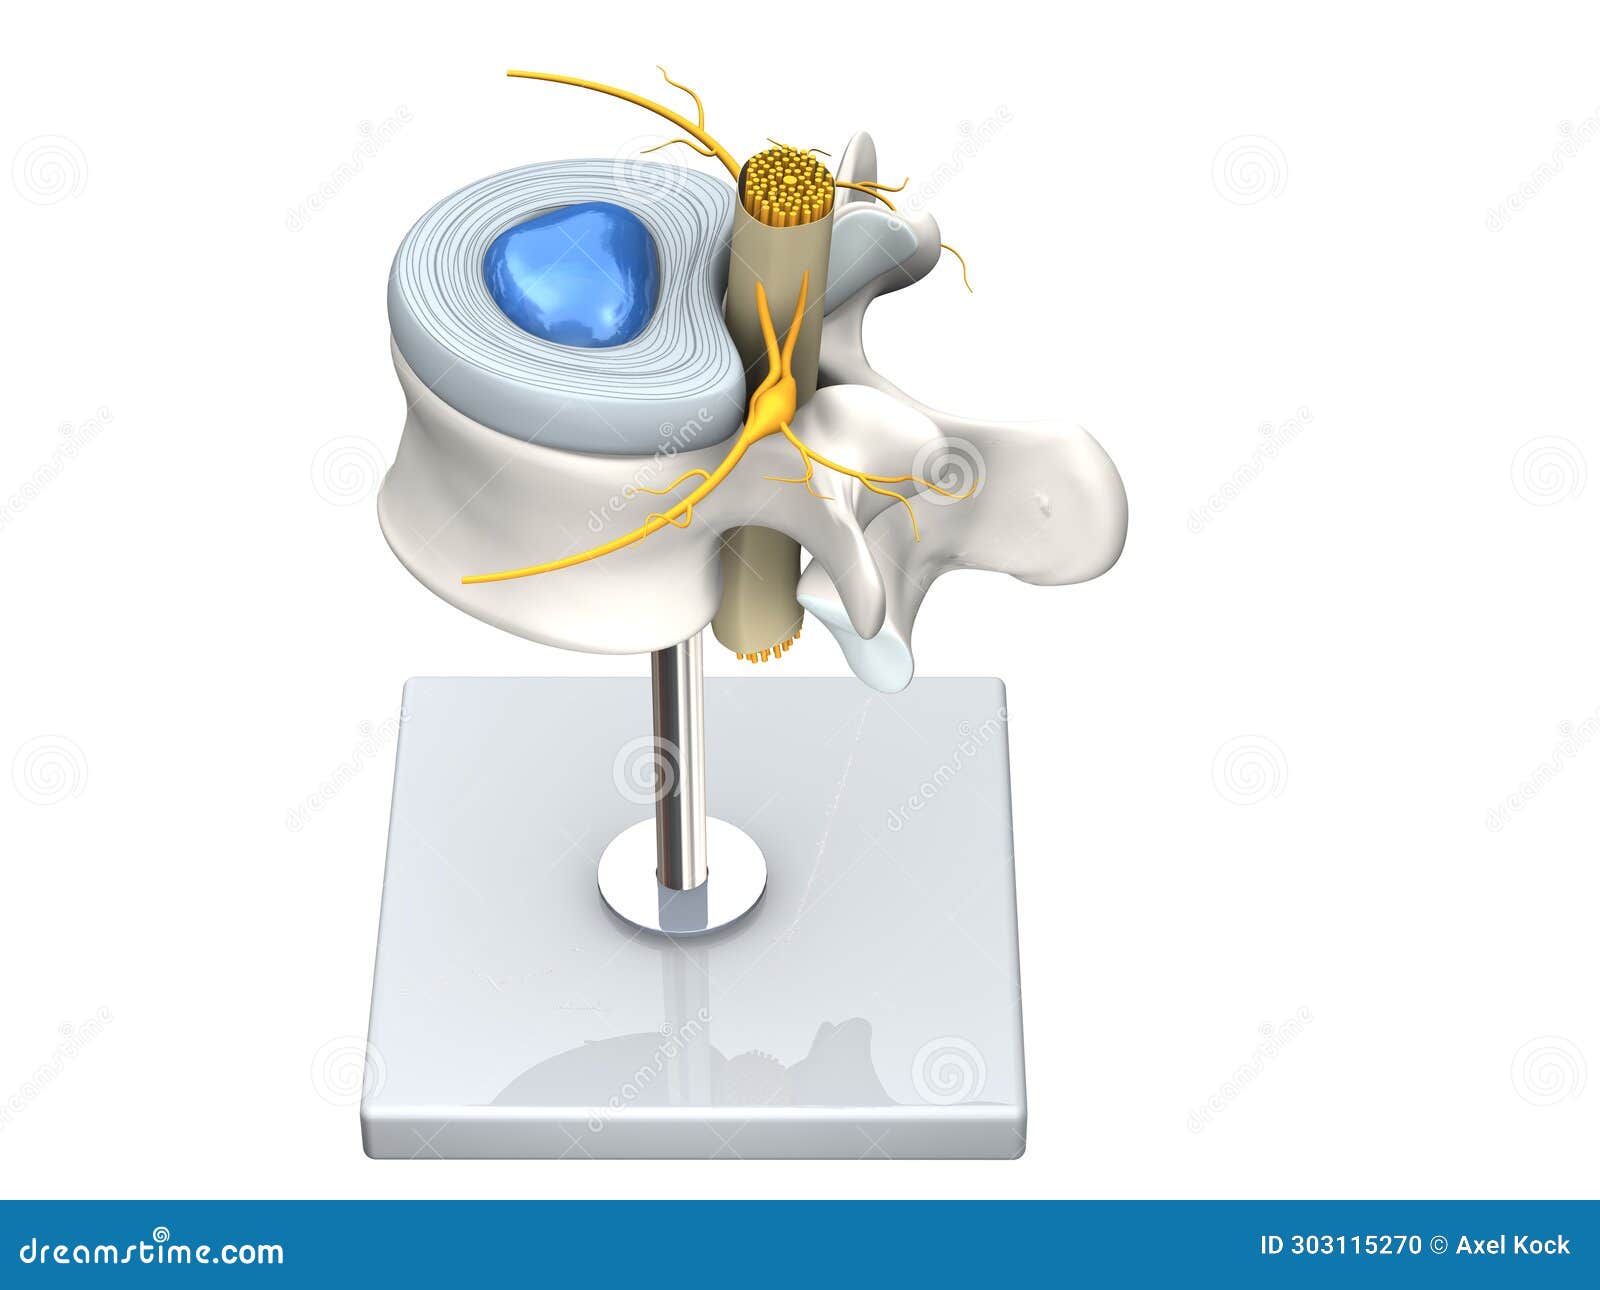 model of a healthy lumbar vertebra with disc and spinal cord.3d 